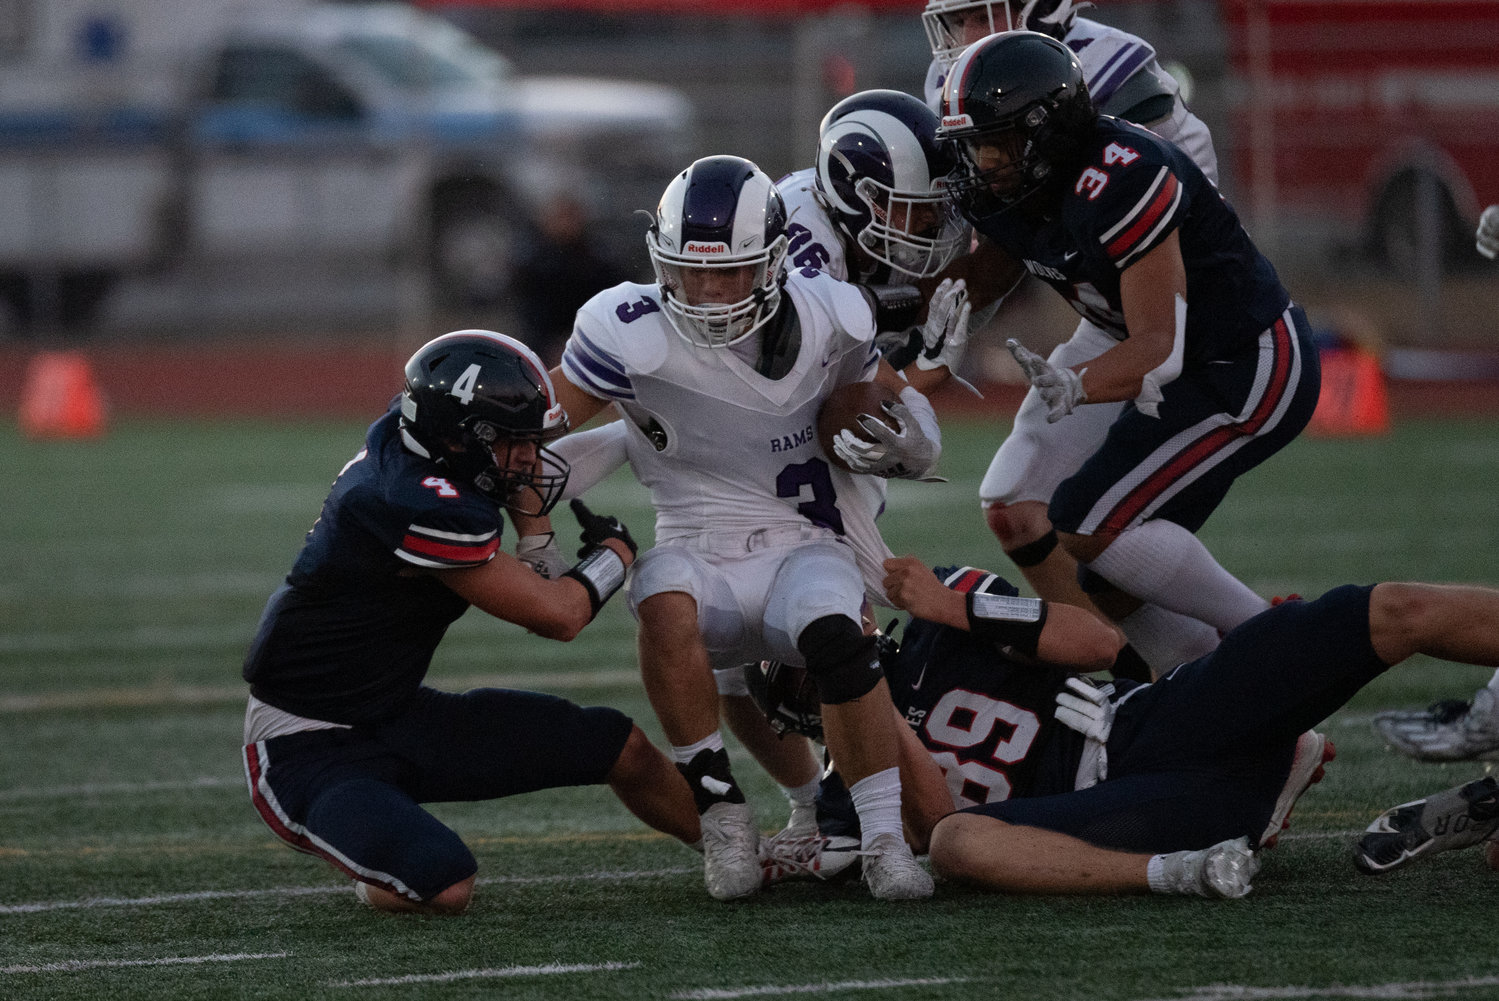 Xander Shepler (4) and Keegan Rongen (89) combine to bring down a North Thurston ballcarrier during Black Hills' 15-0 win over the Rams on Sept. 8 in Lacey.